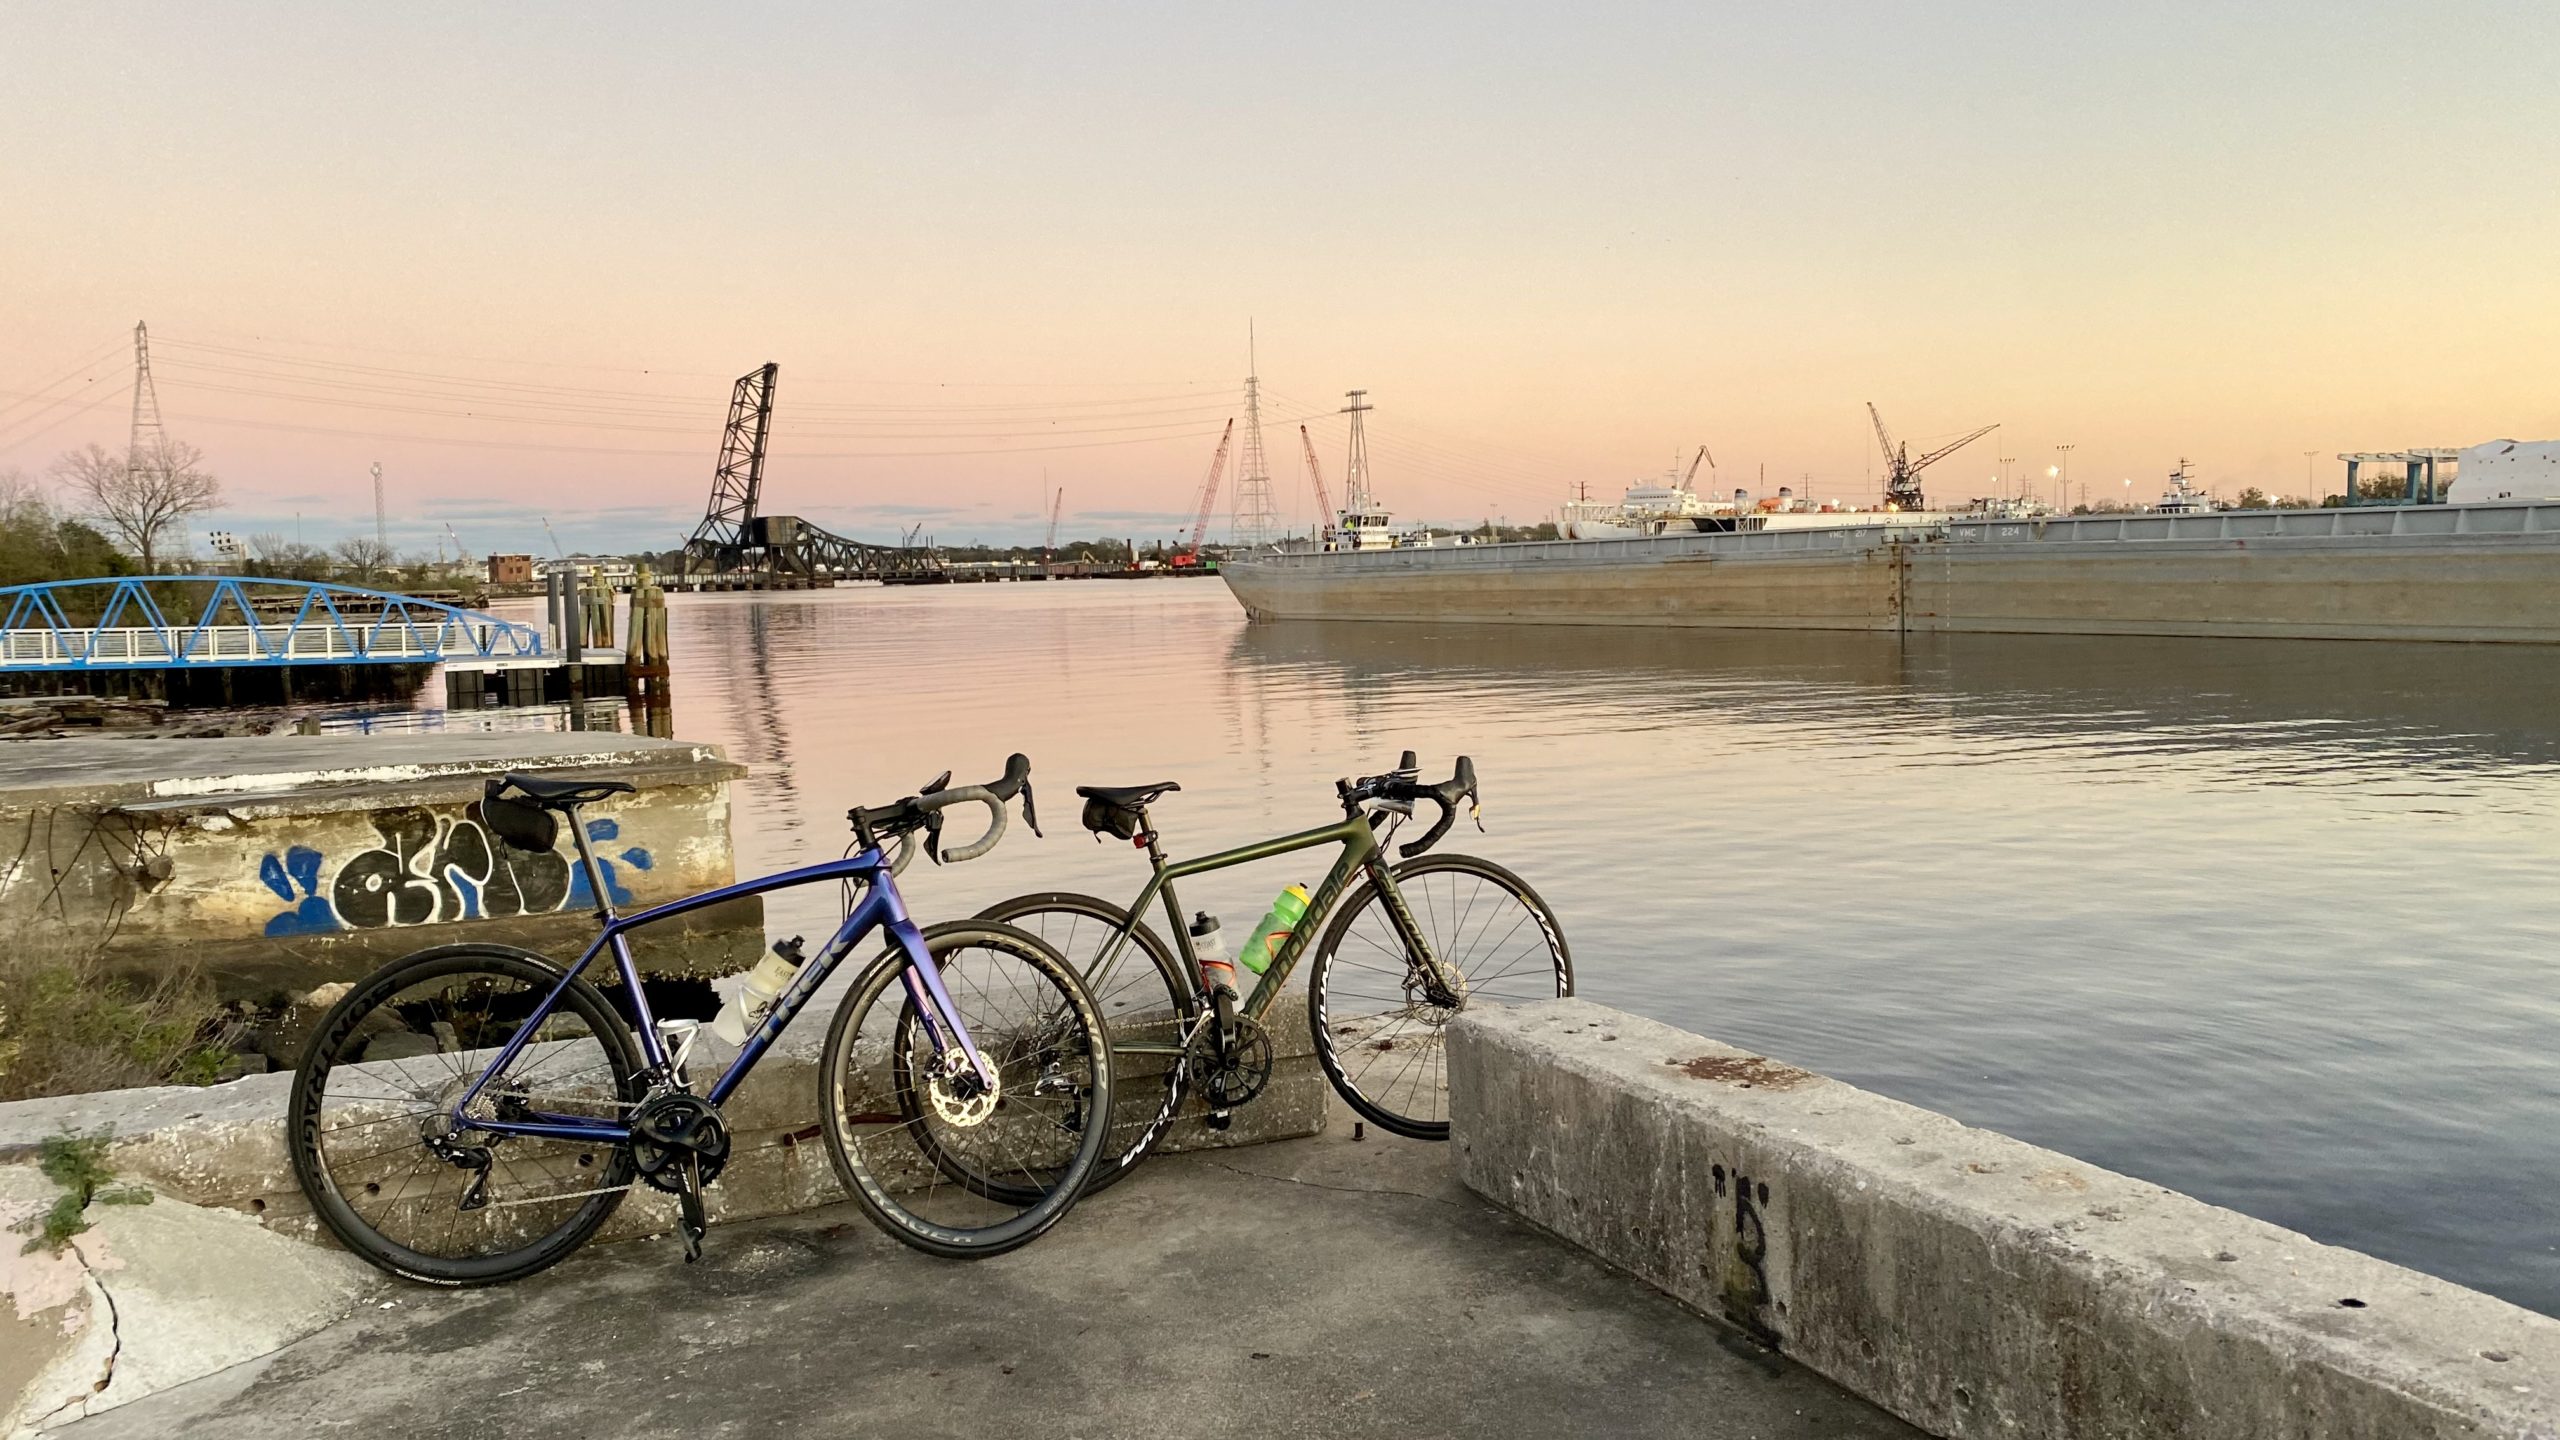 bikerumor pic of the day two bicycles lean against a concrete barrier along the elizabeth river in norfolk virginia as the sun has set and the pink sky is reflecting off the river.